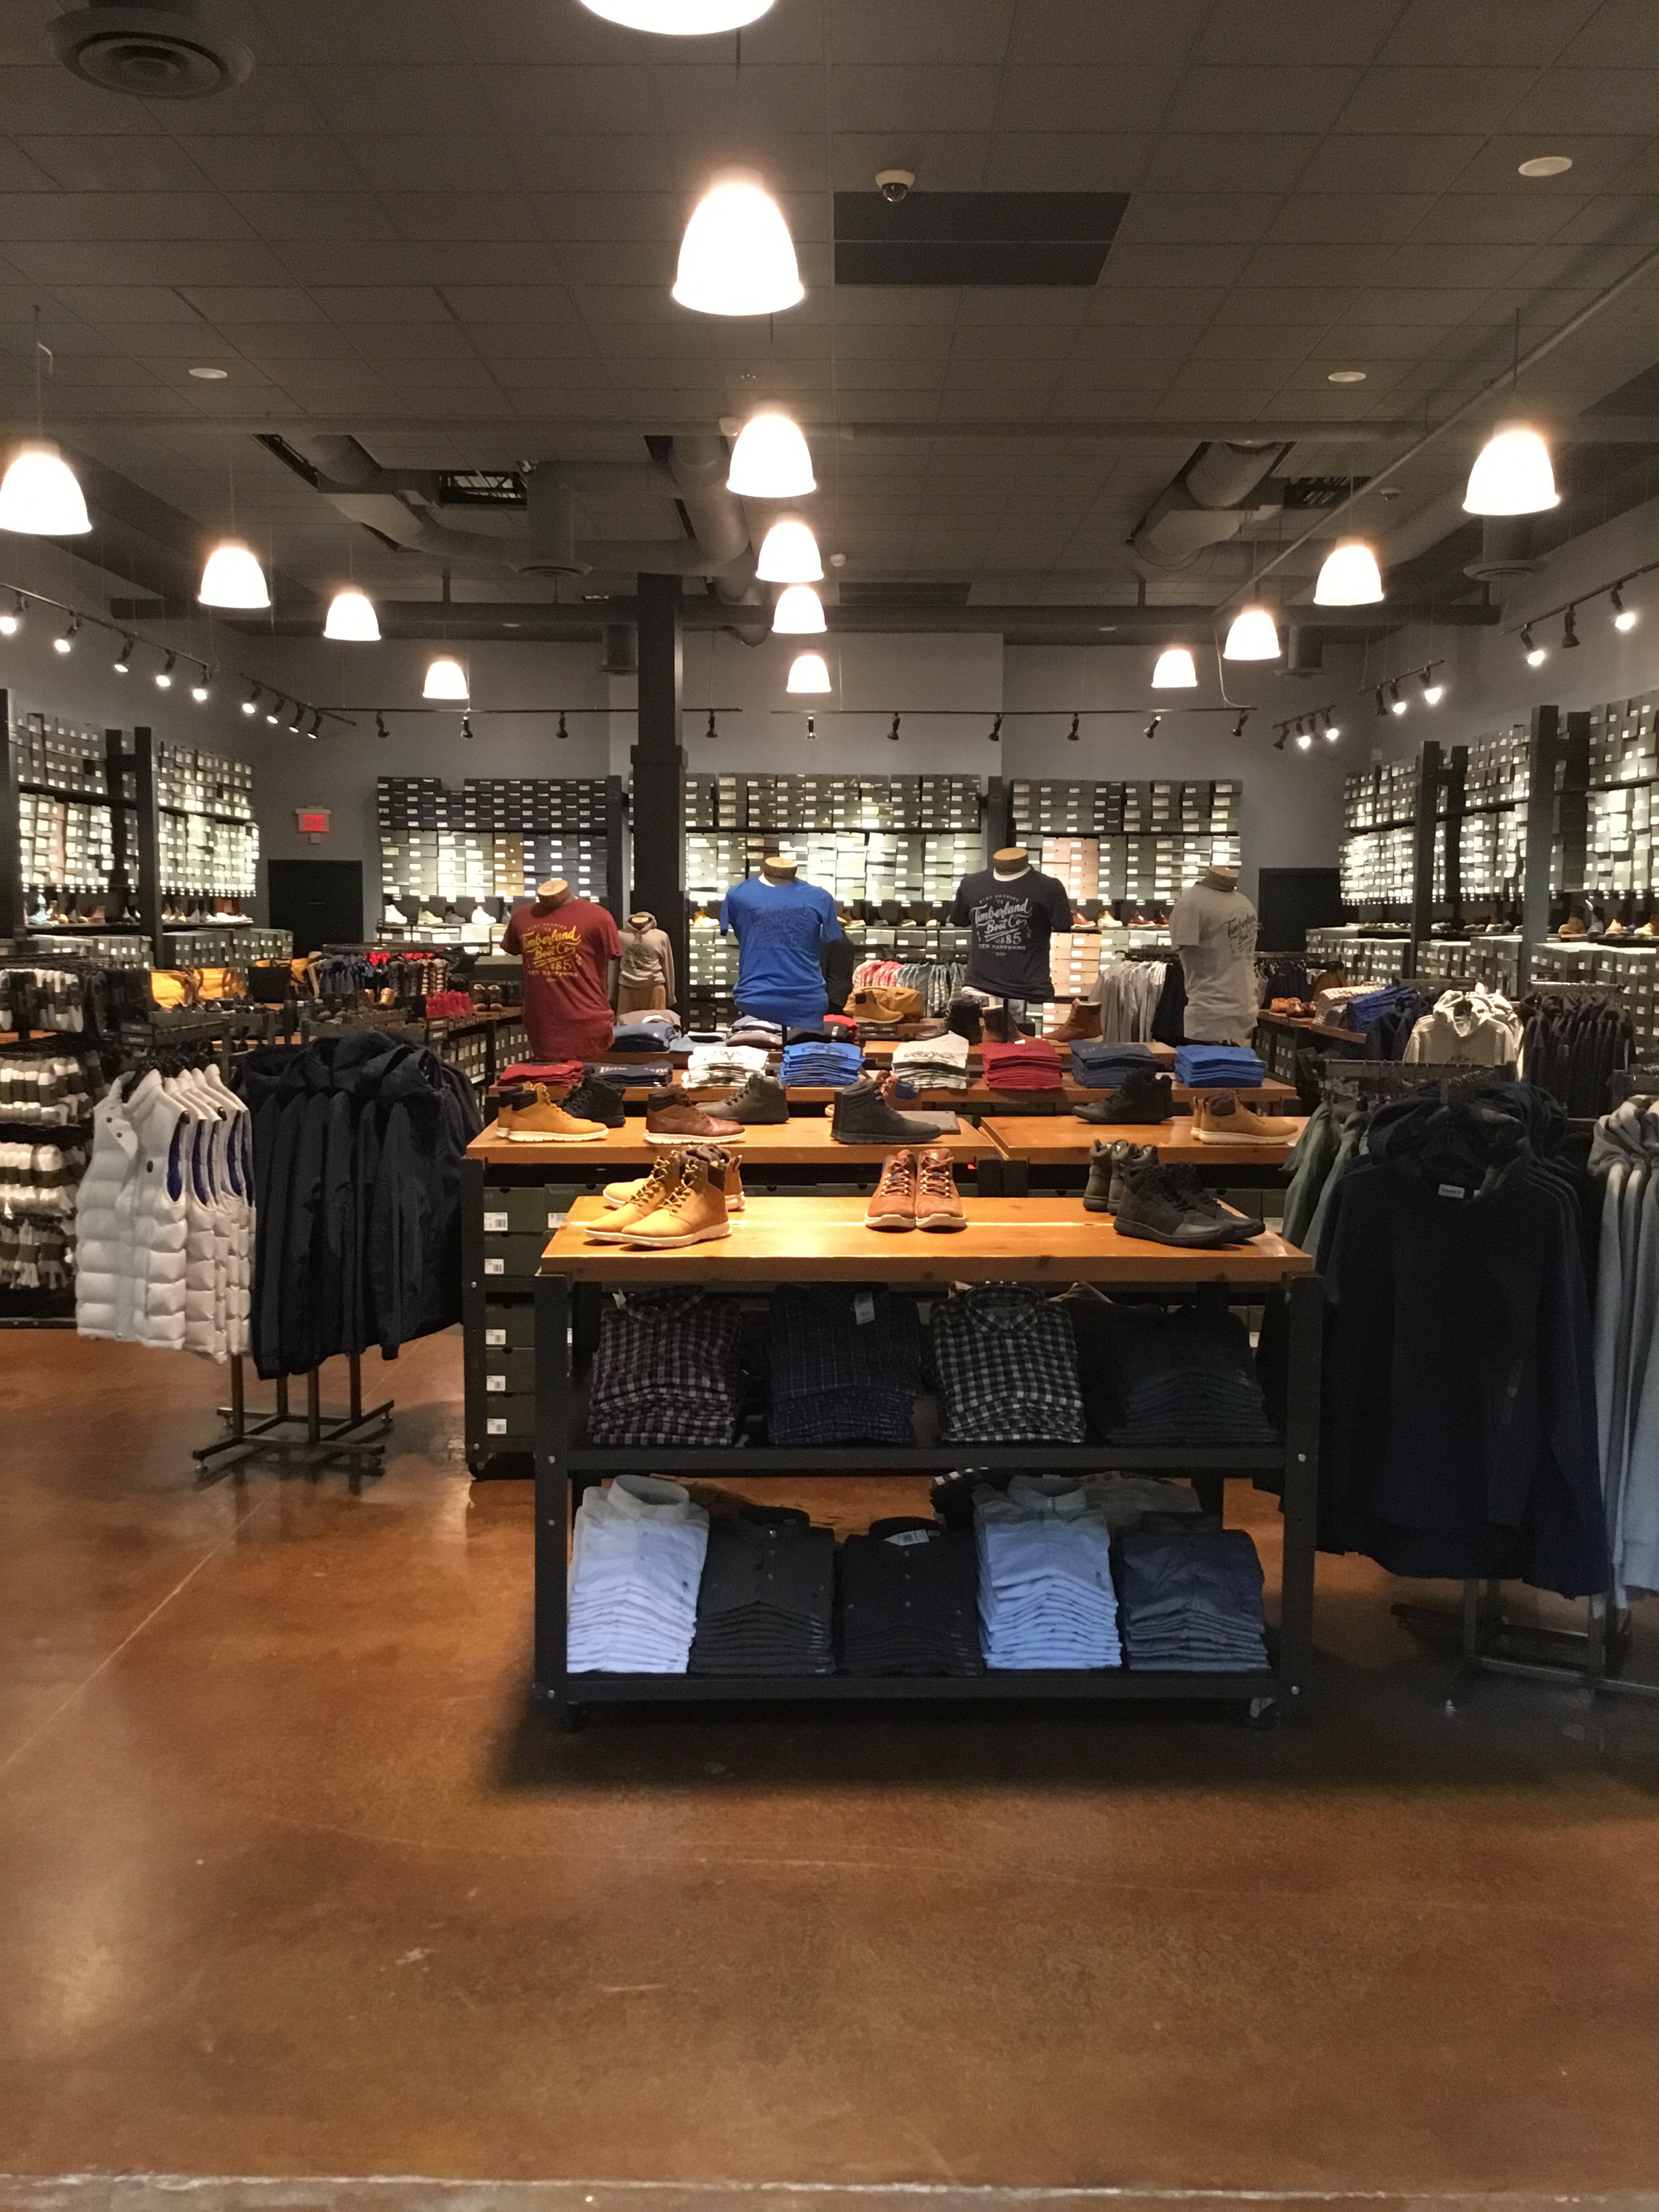 timberland outlet in great lakes crossing